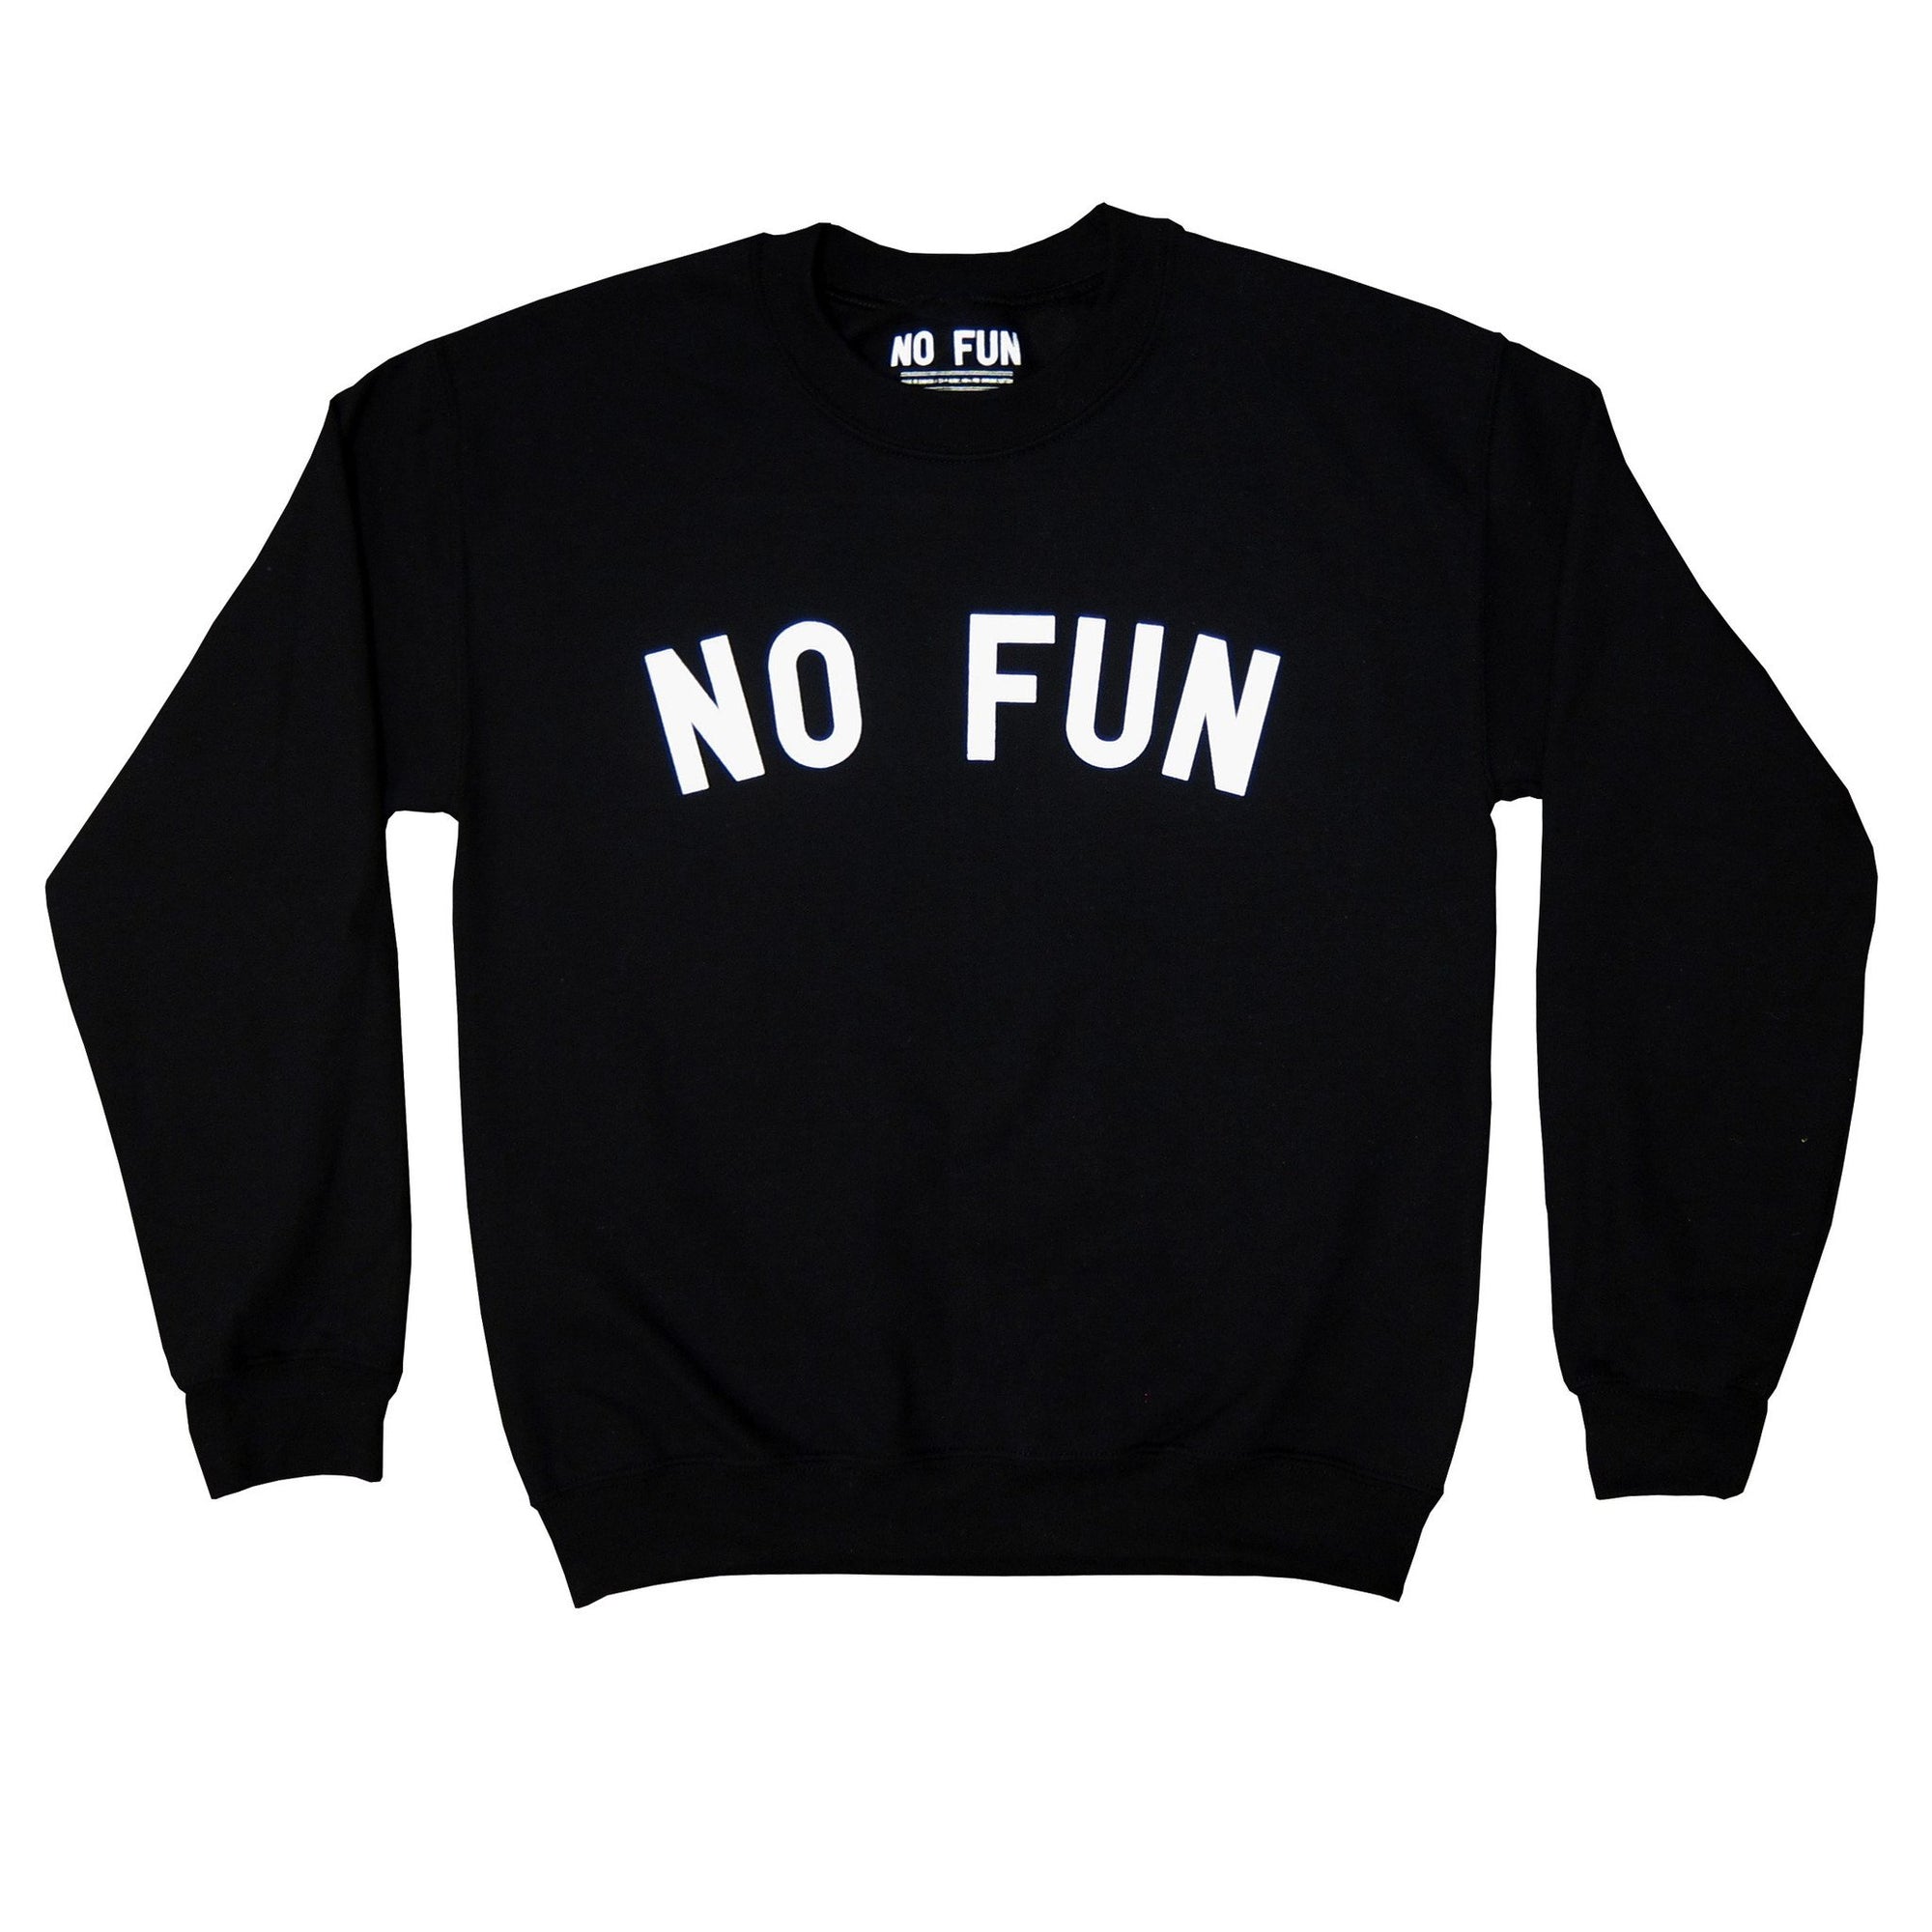 The original "NO FUN®" logo crewneck sweater.  The sweater is black and features large white text that reads "NO FUN".